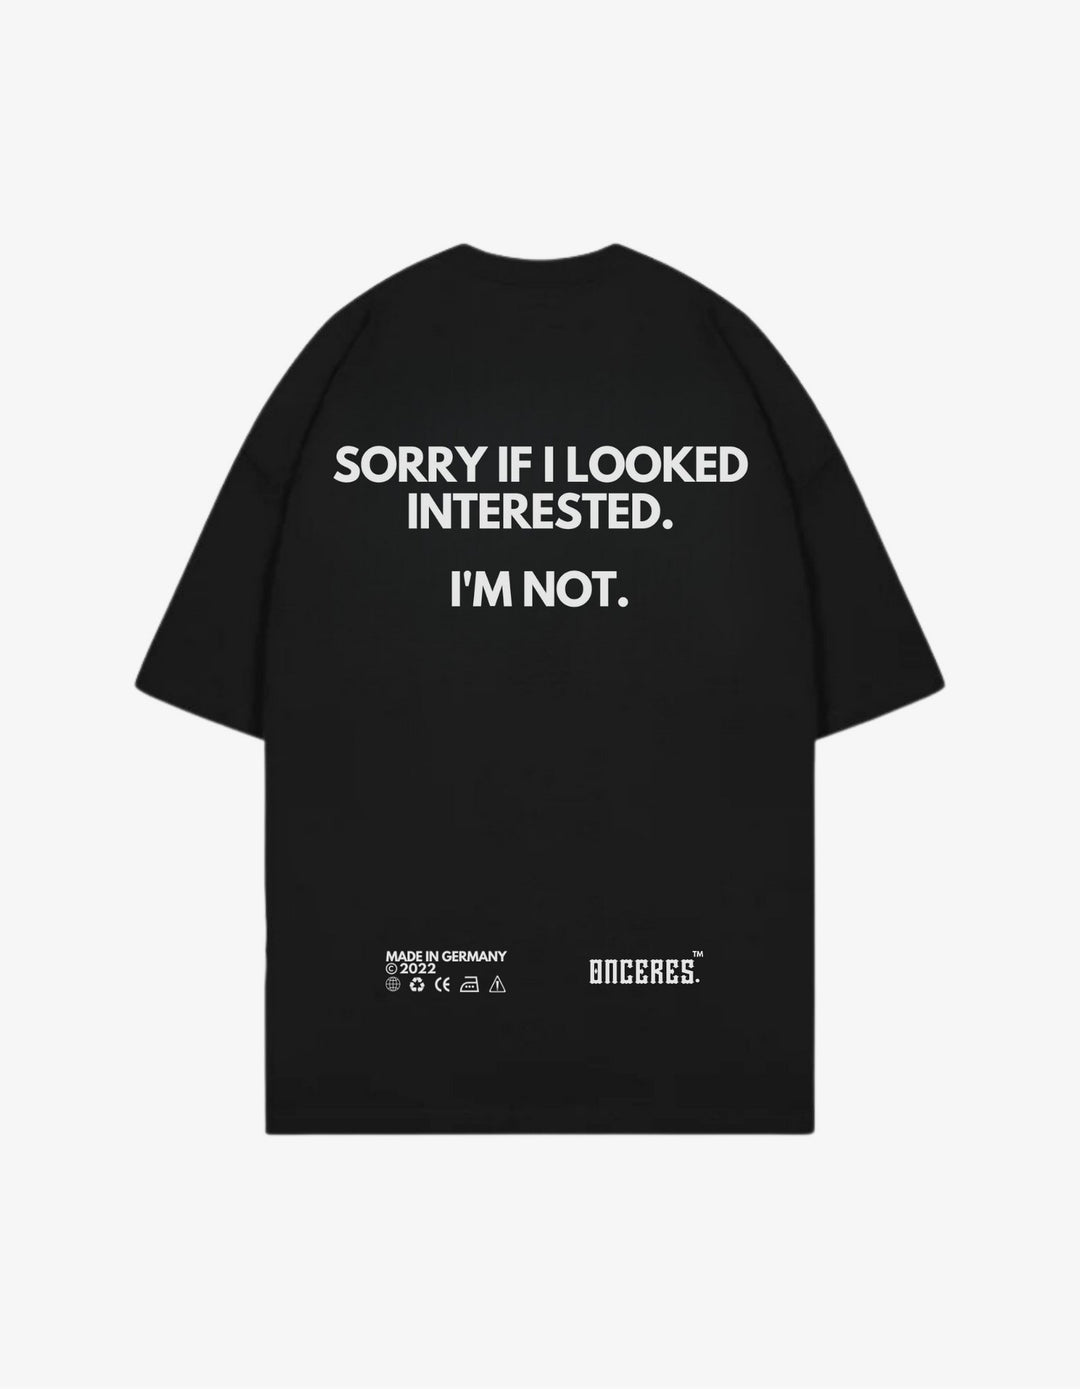 Sorry if i looked interested. - Onceres™